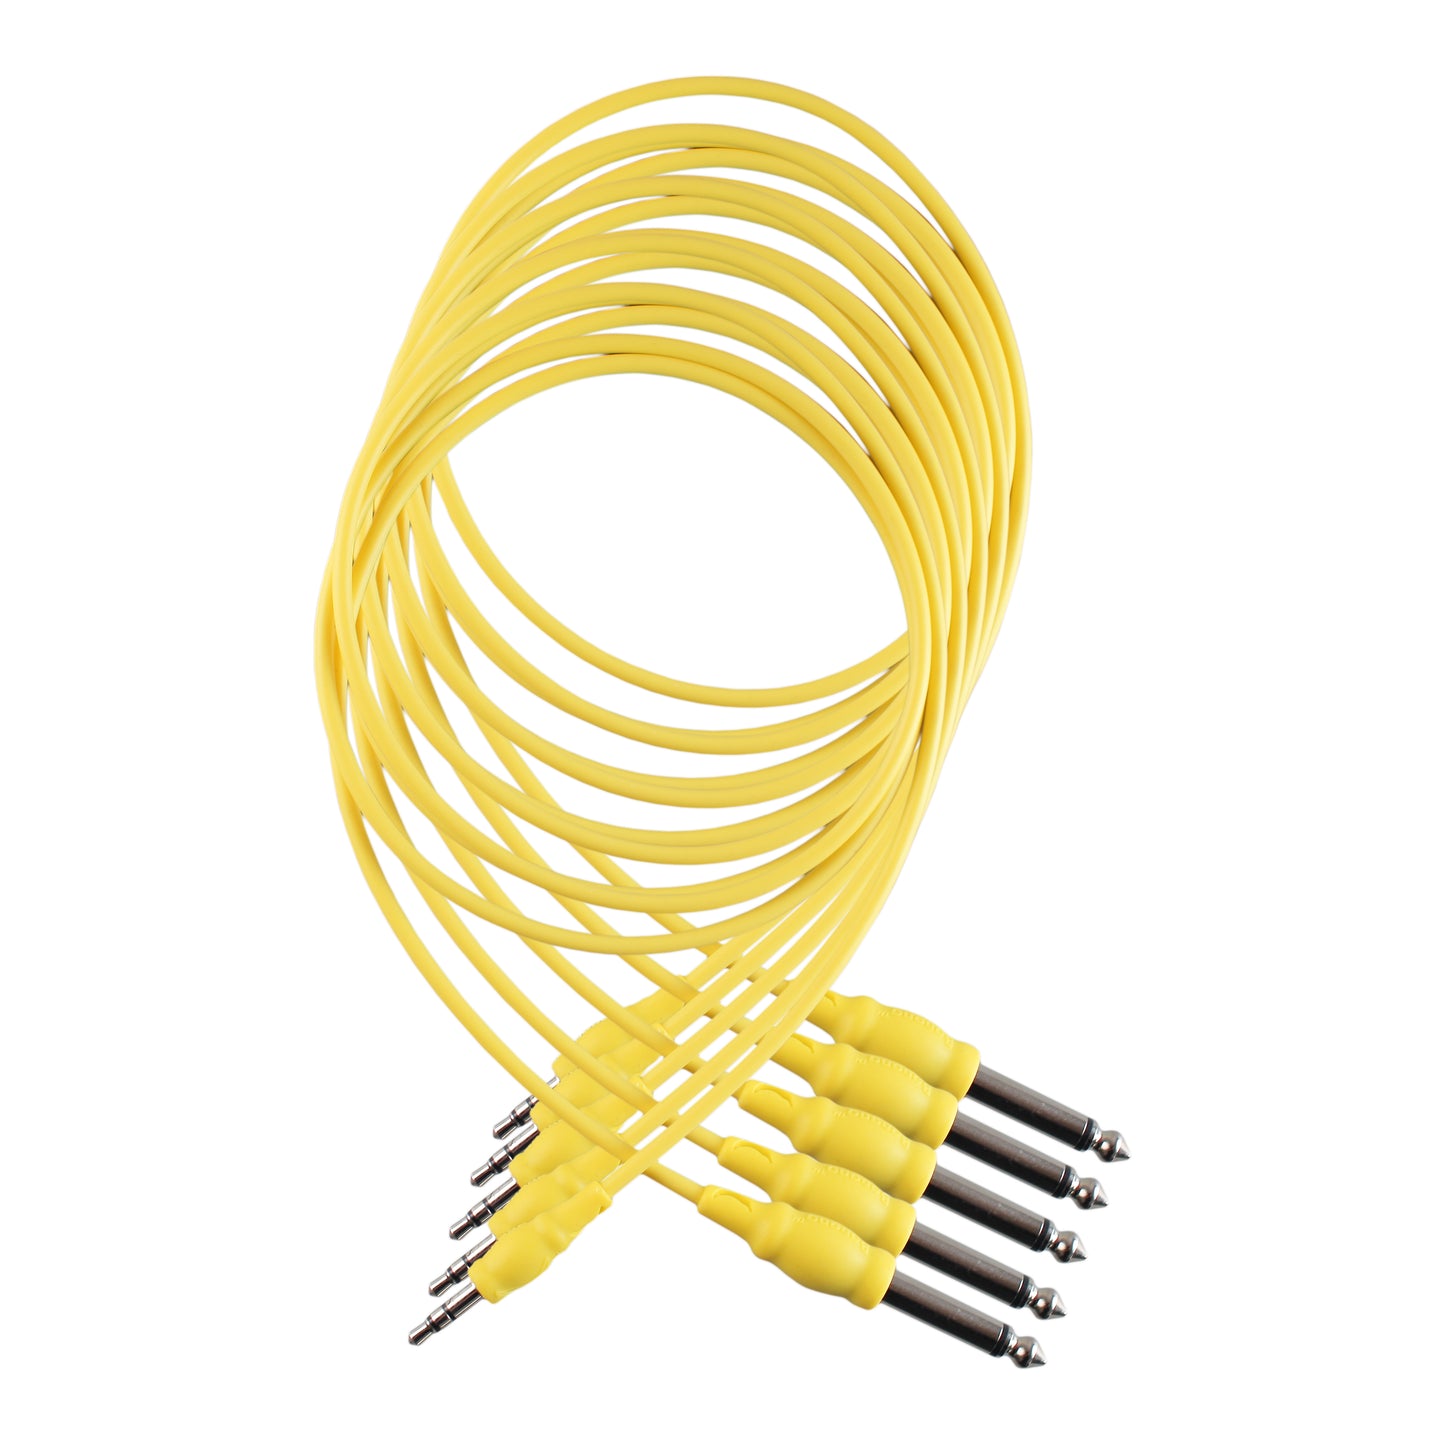 Stereo 3.5mm to Mono 6.35mm Mixer Cable Yellow (100cm)